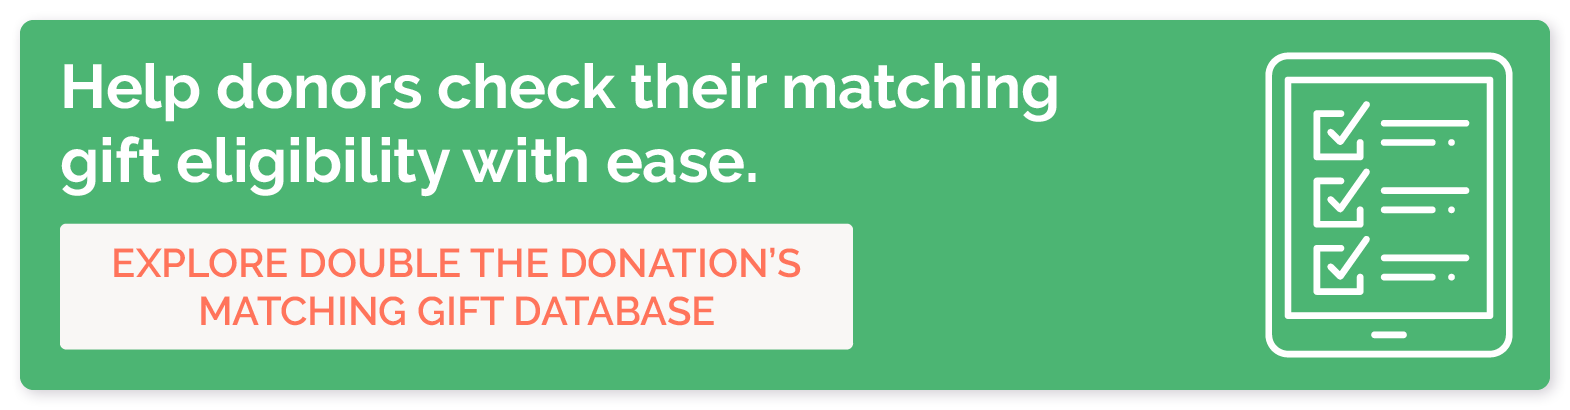 Click to get a demo of Double the Donation’s matching gift database solution to make managing matching gift eligibility easier.